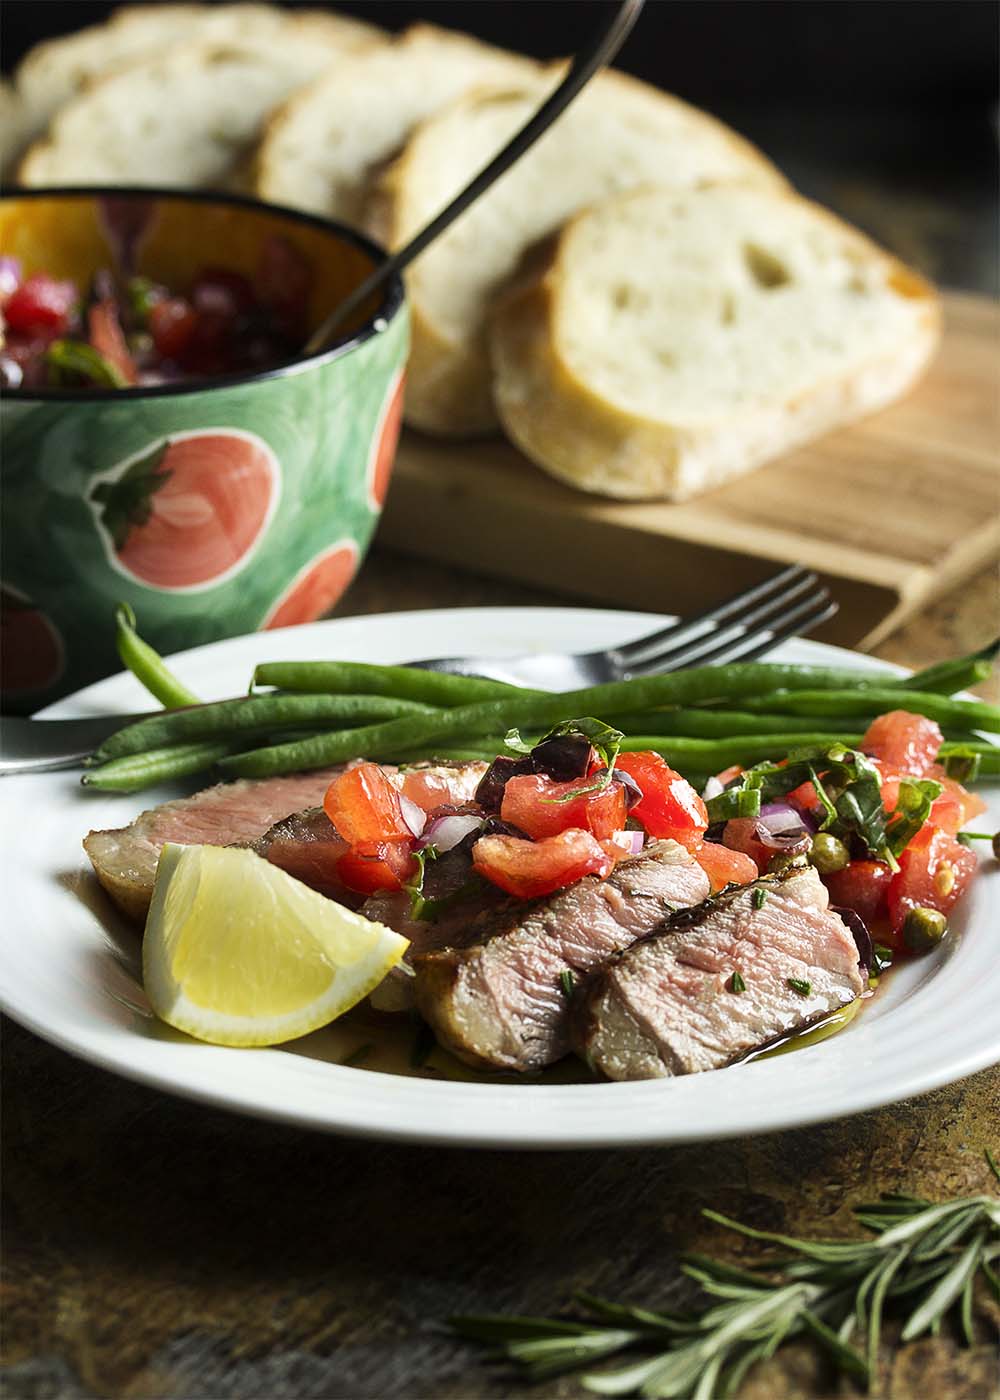 Grilled Tuscan steak is a simple, yet elegant Florentine style specialty! Start with a couple of thick-cut, bone-in steaks, add fresh herbs and a hot grill, then finish them off with fruity olive oil and a squeeze of lemon. | justalittlebitofbacon.com